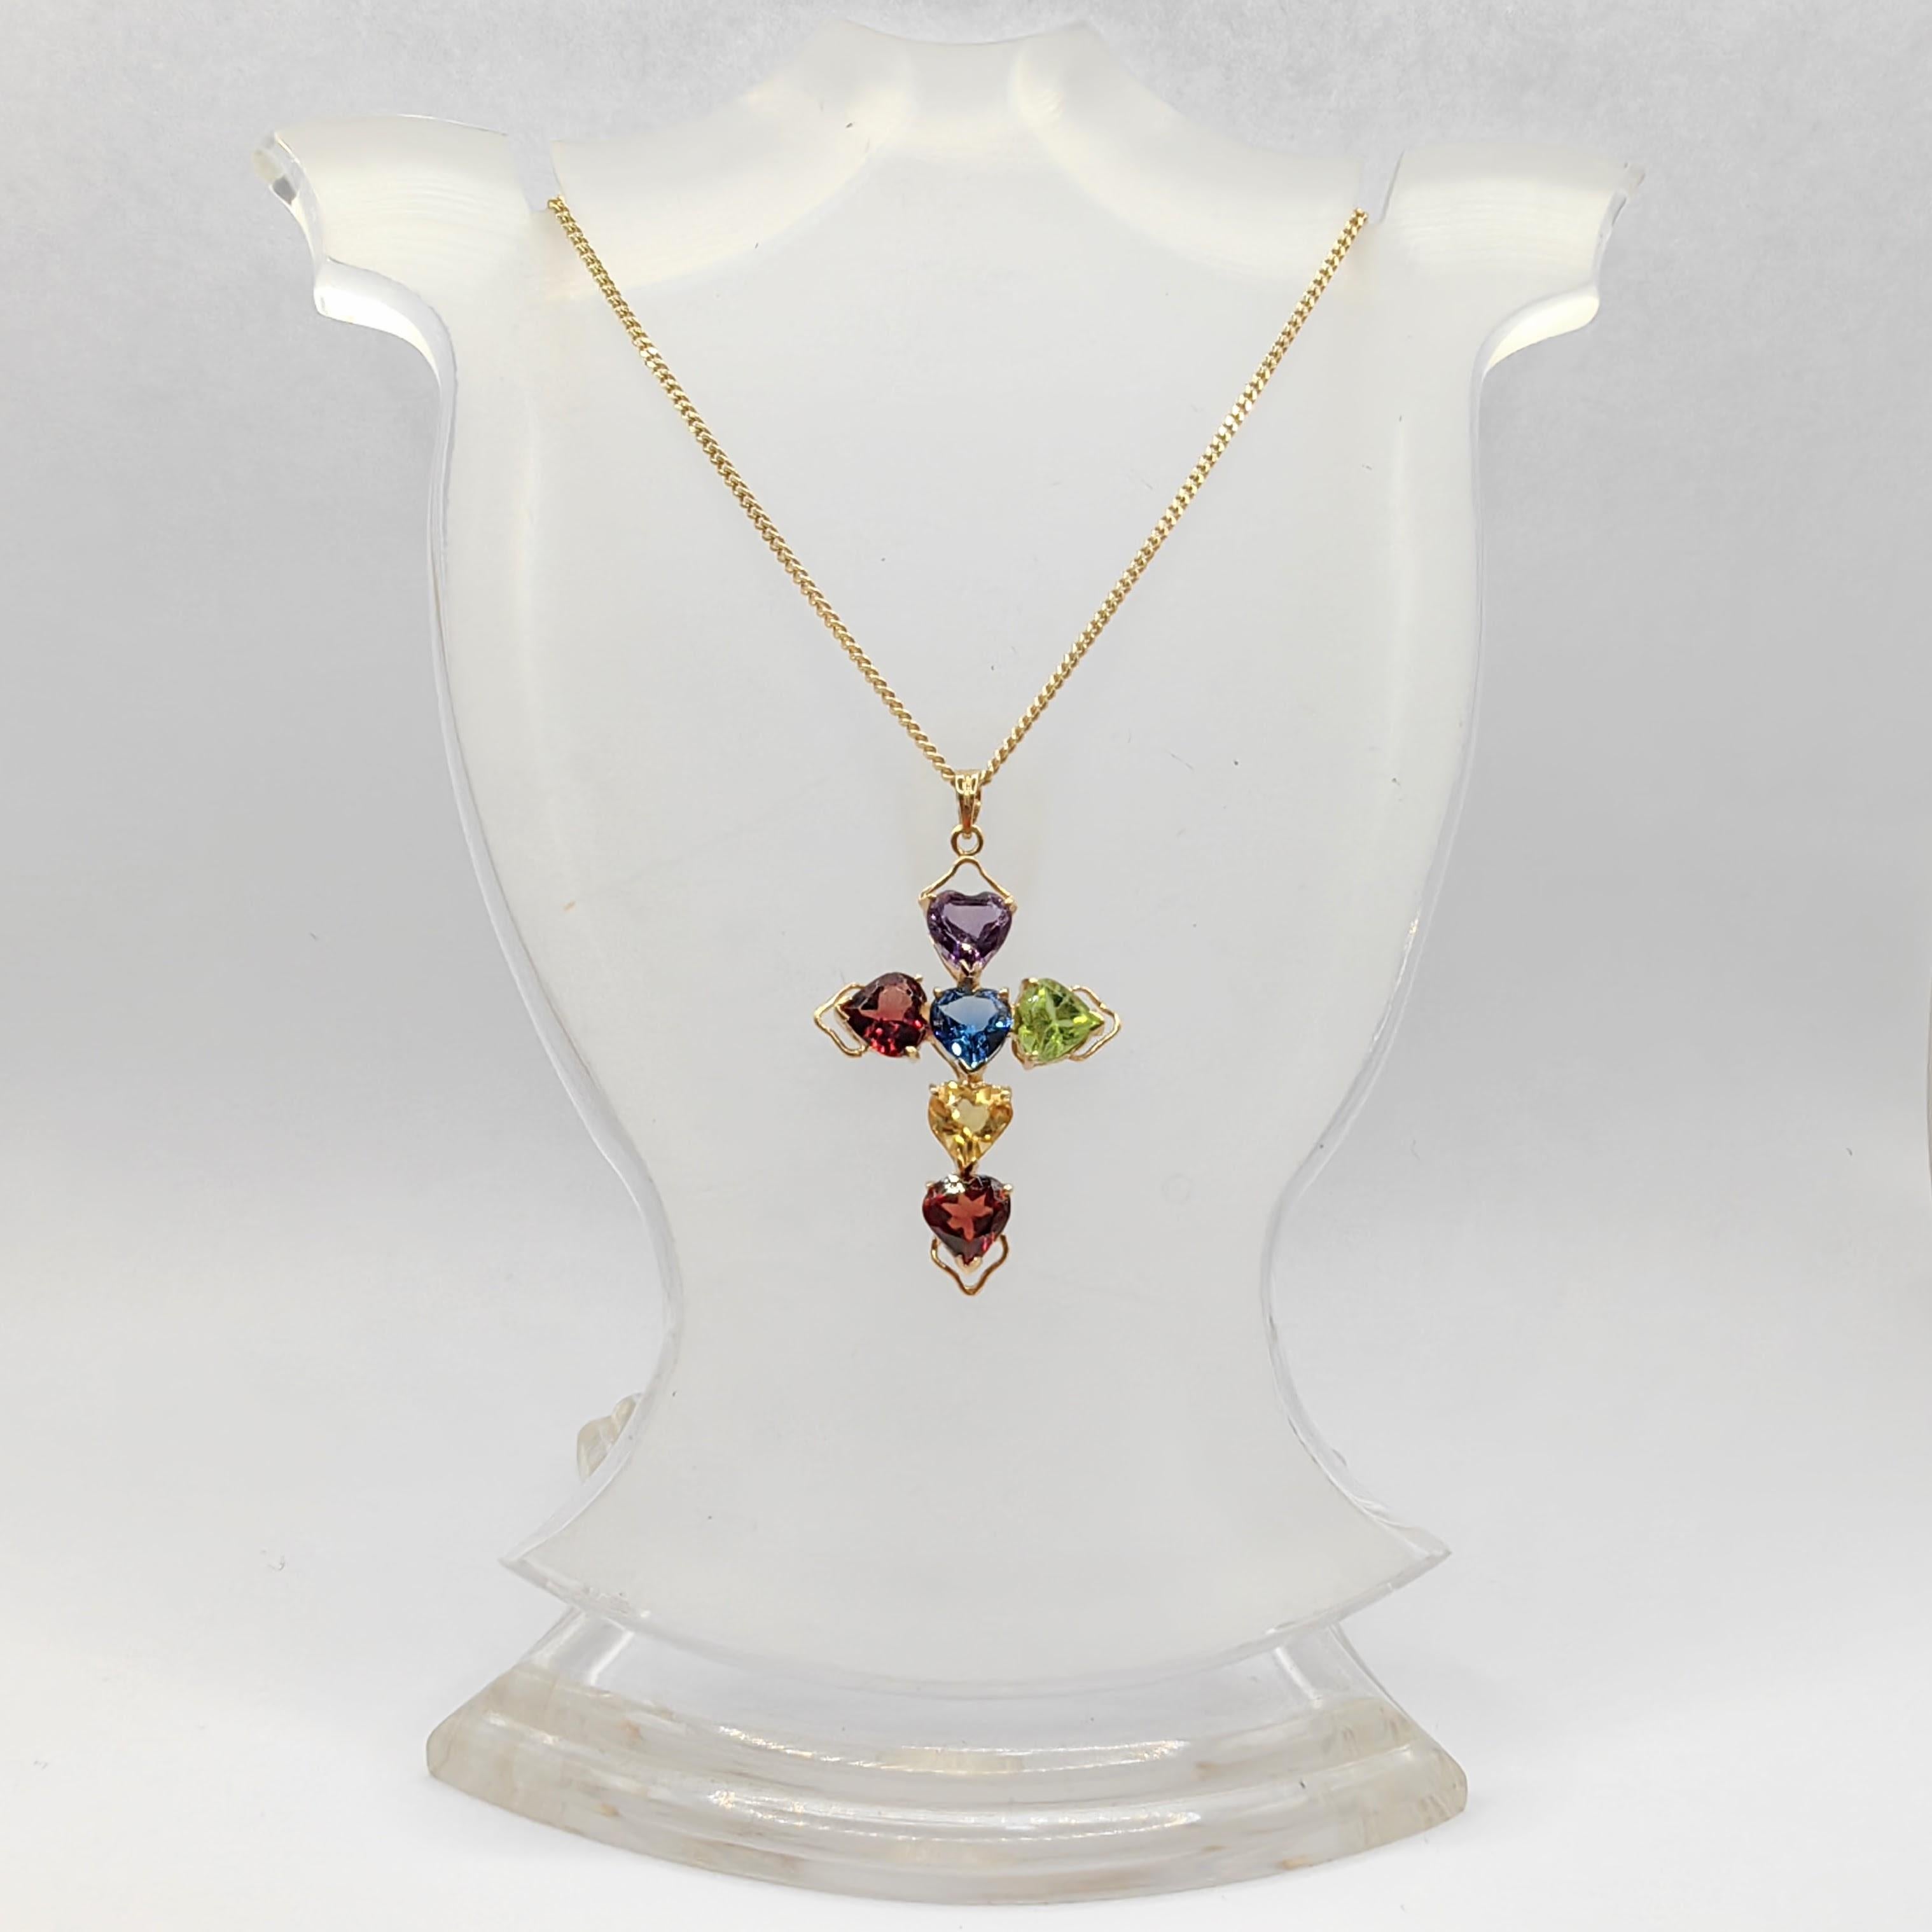 Vintage Heart Cut Mixed Stones Cross Necklace Pendant in 14K Yellow Gold For Sale 1